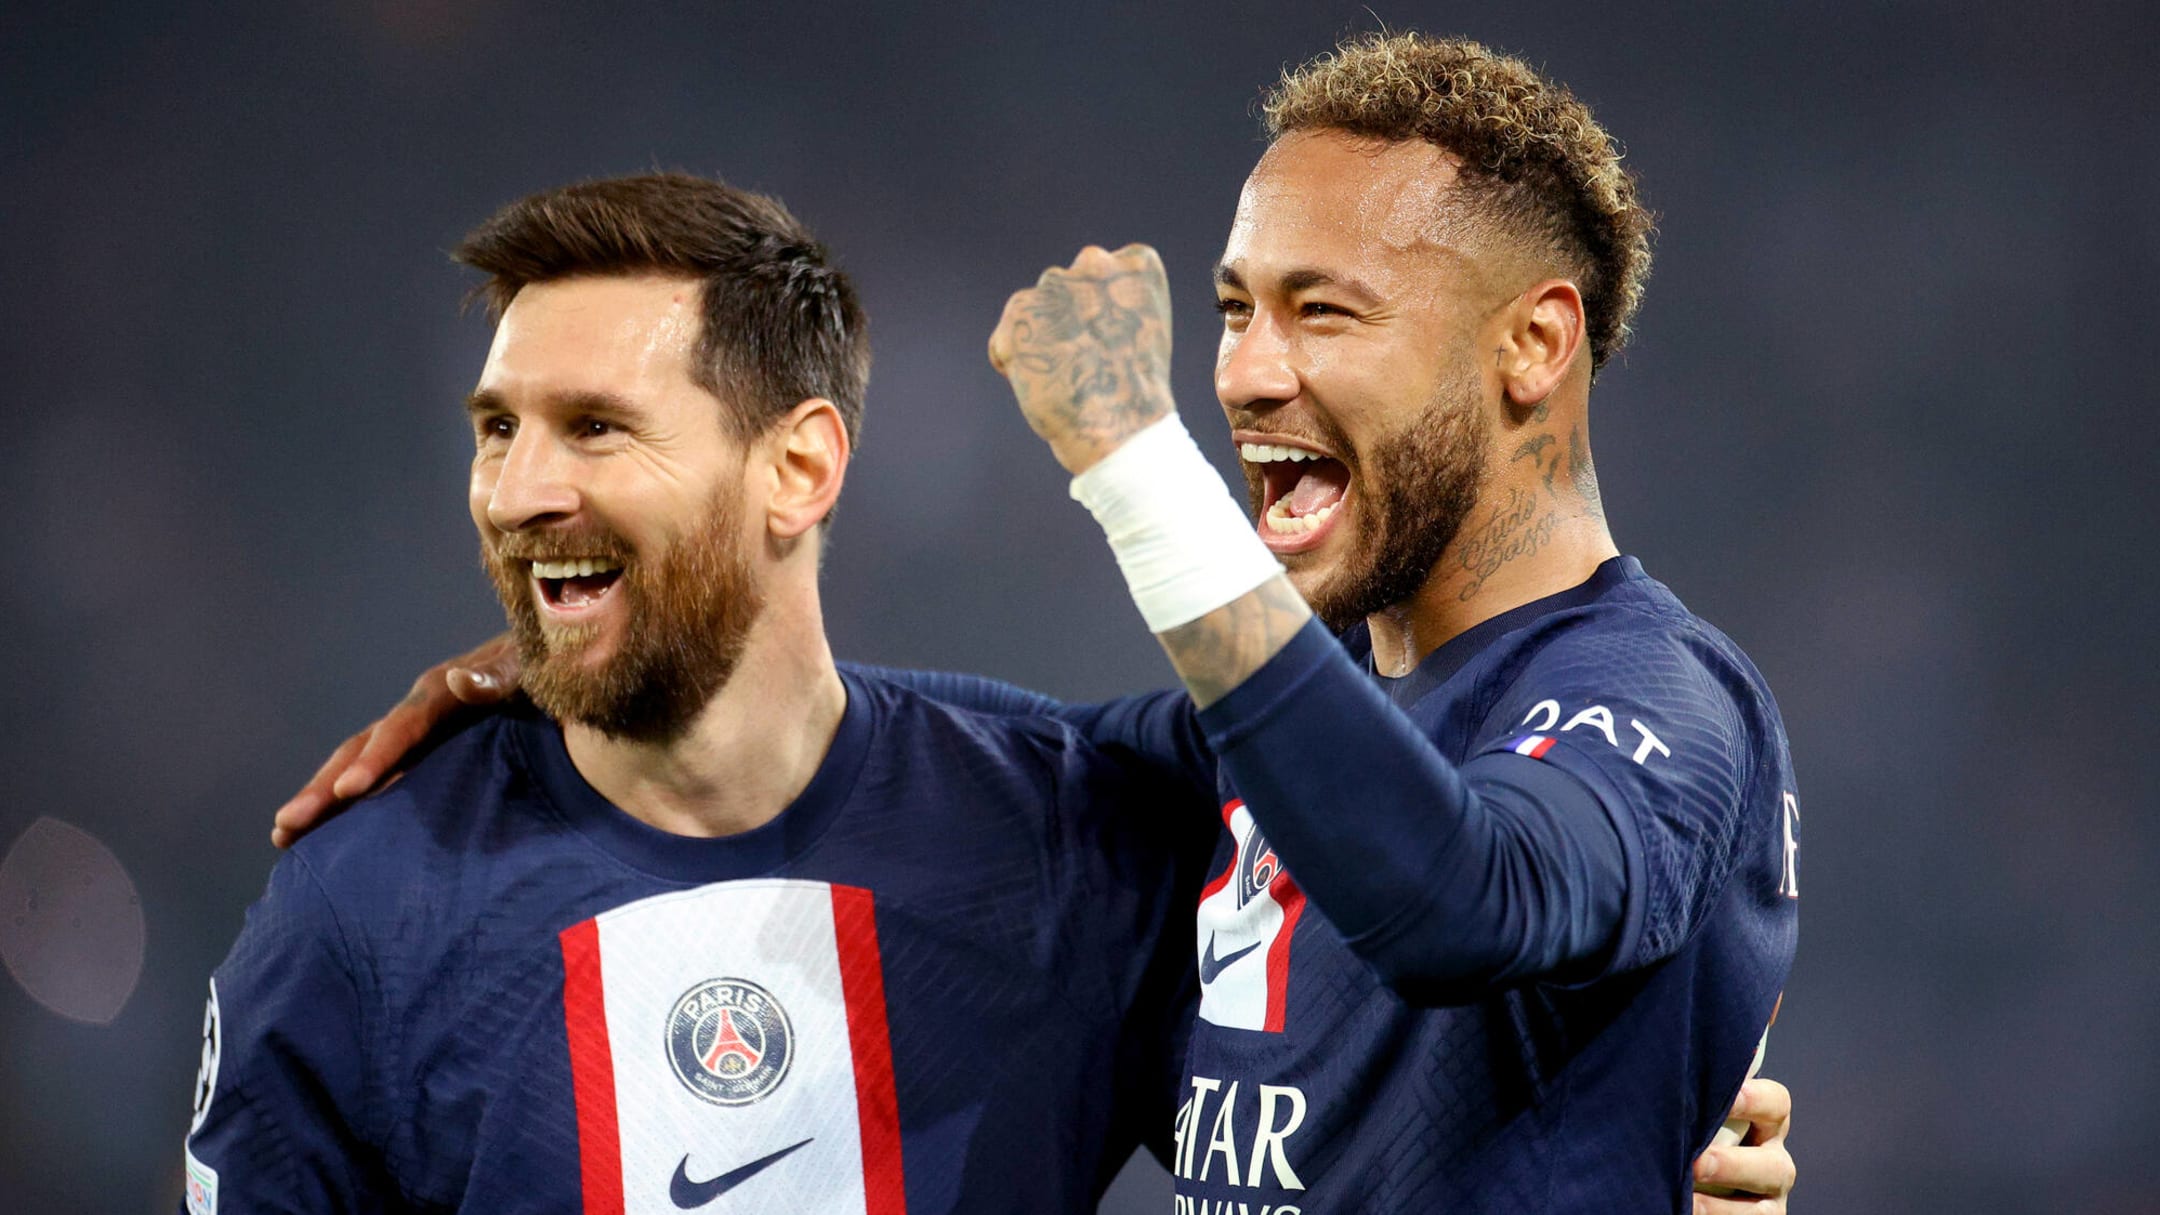 Top stars at World Cup 2022: Lionel Messi, Kylian Mbappe, Neymar, Cristiano  Ronaldo, Harry Kane among the big names in Qatar